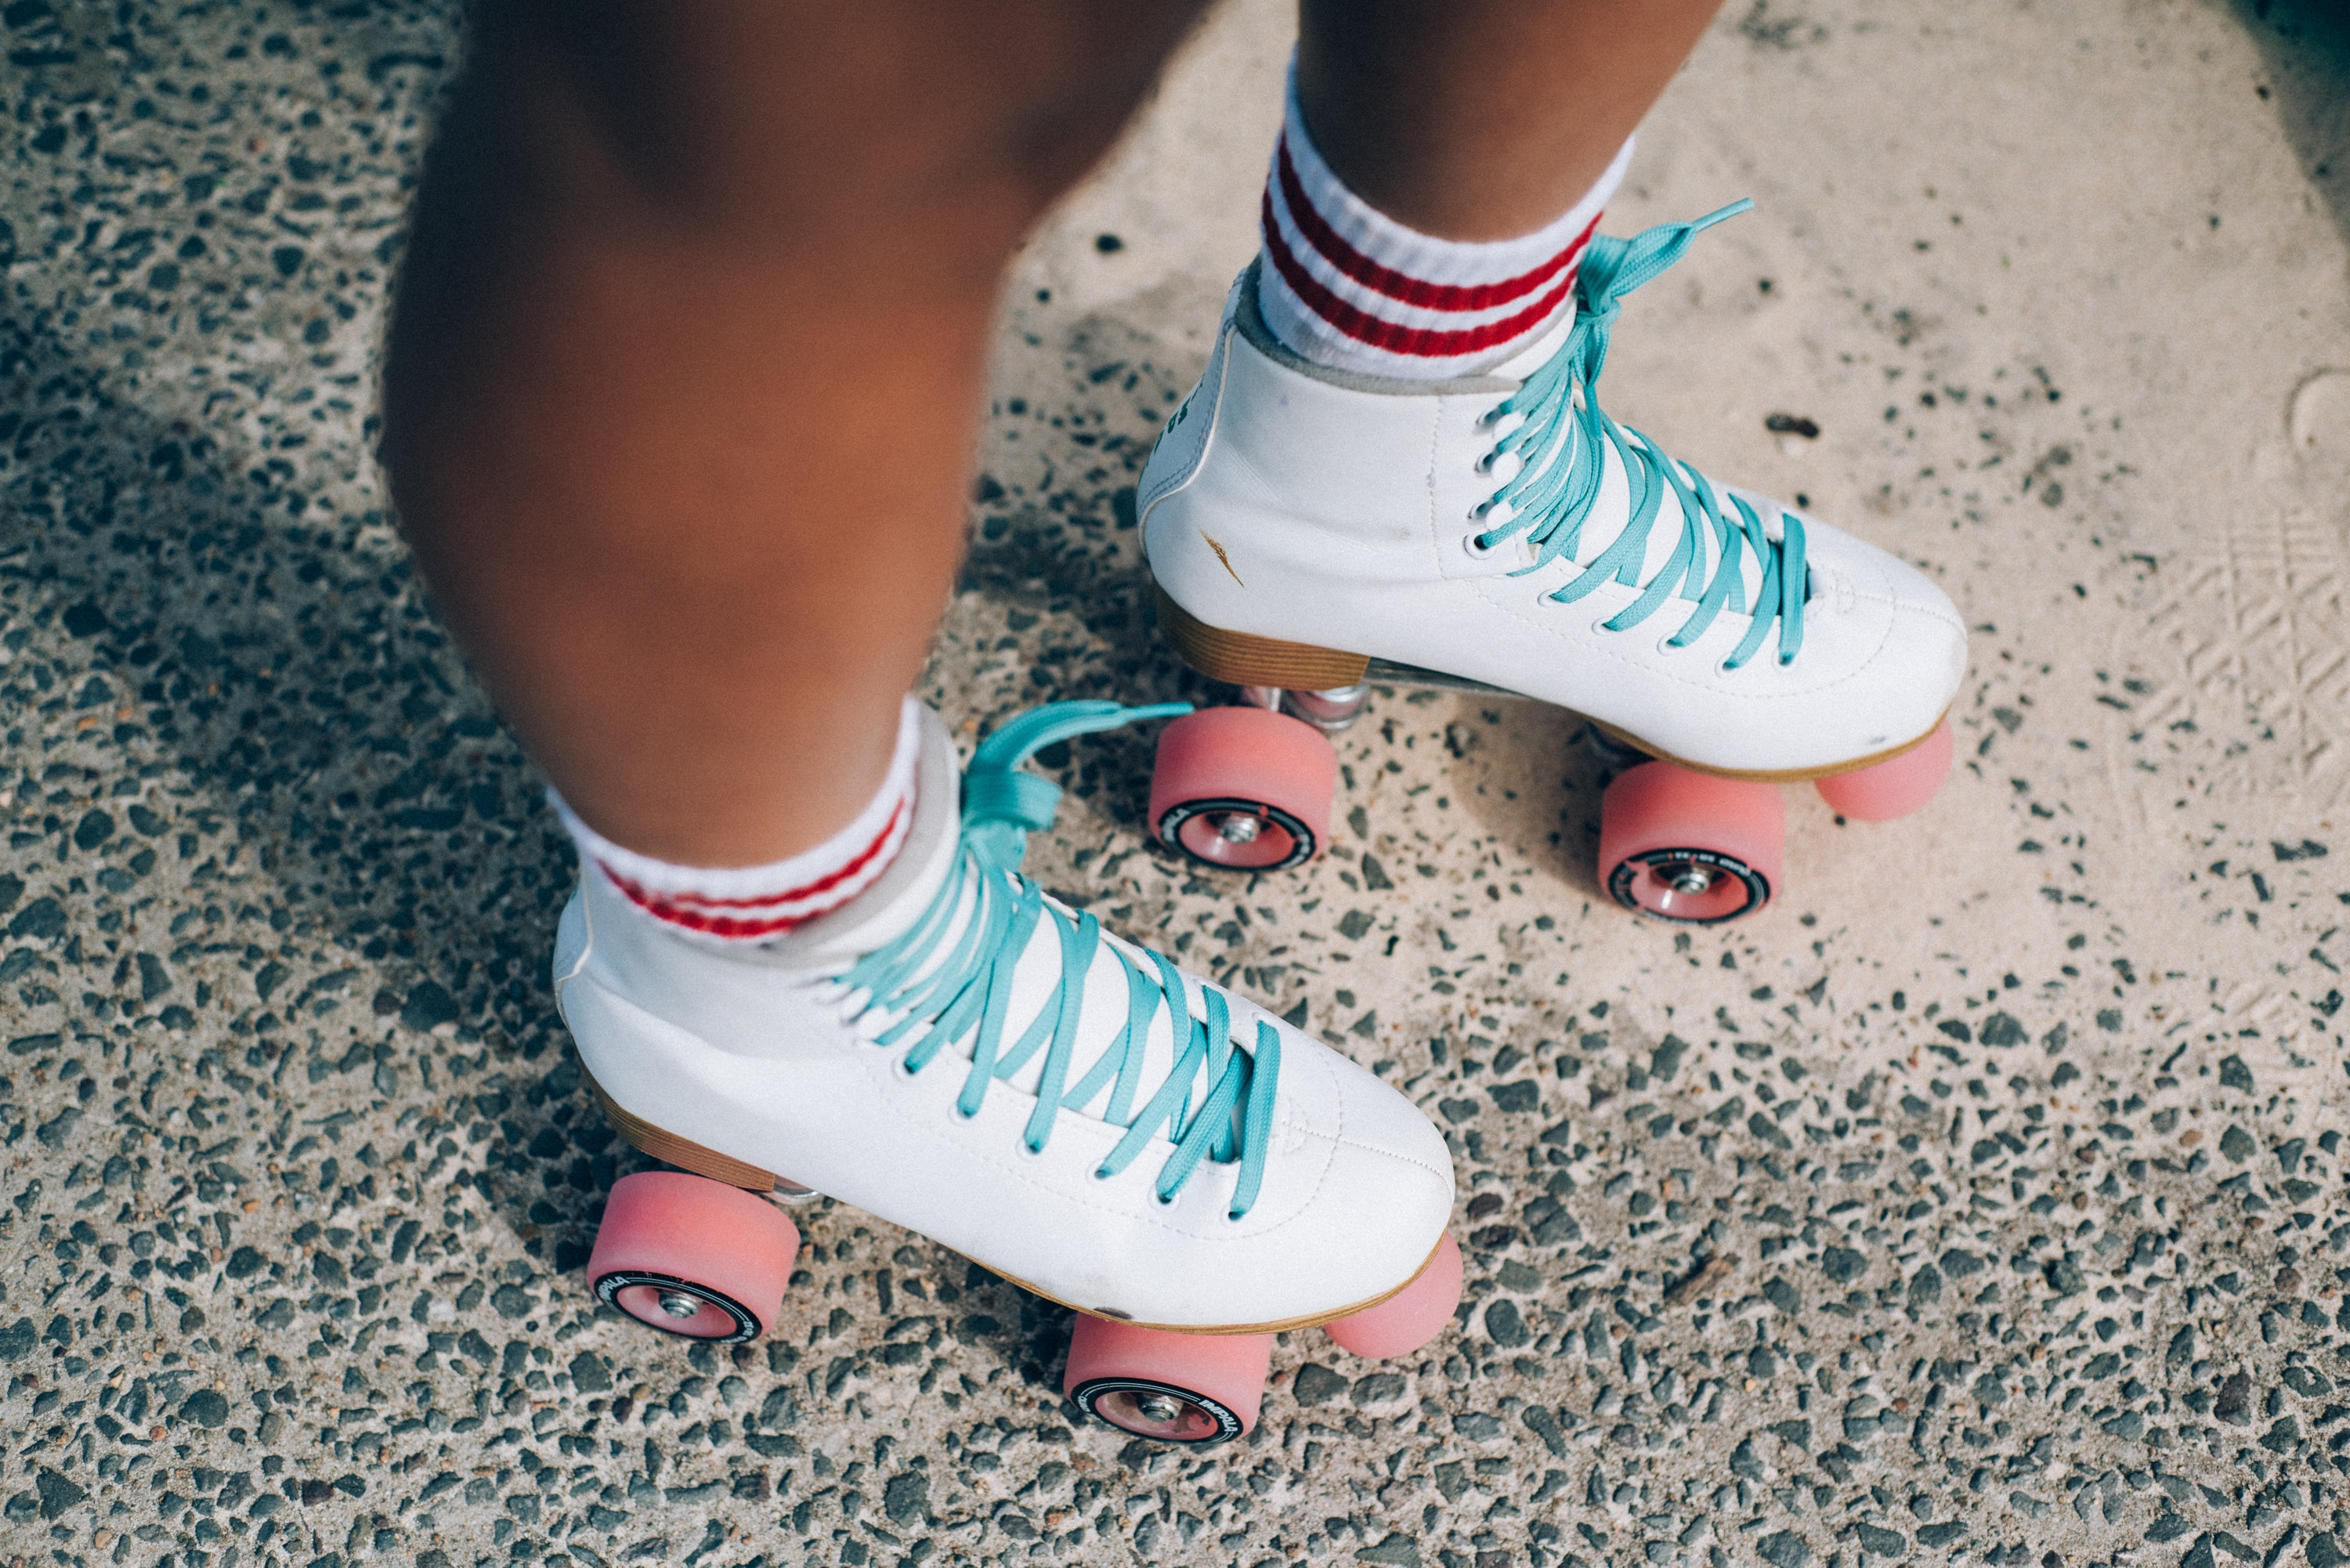 White roller skates with blue laces